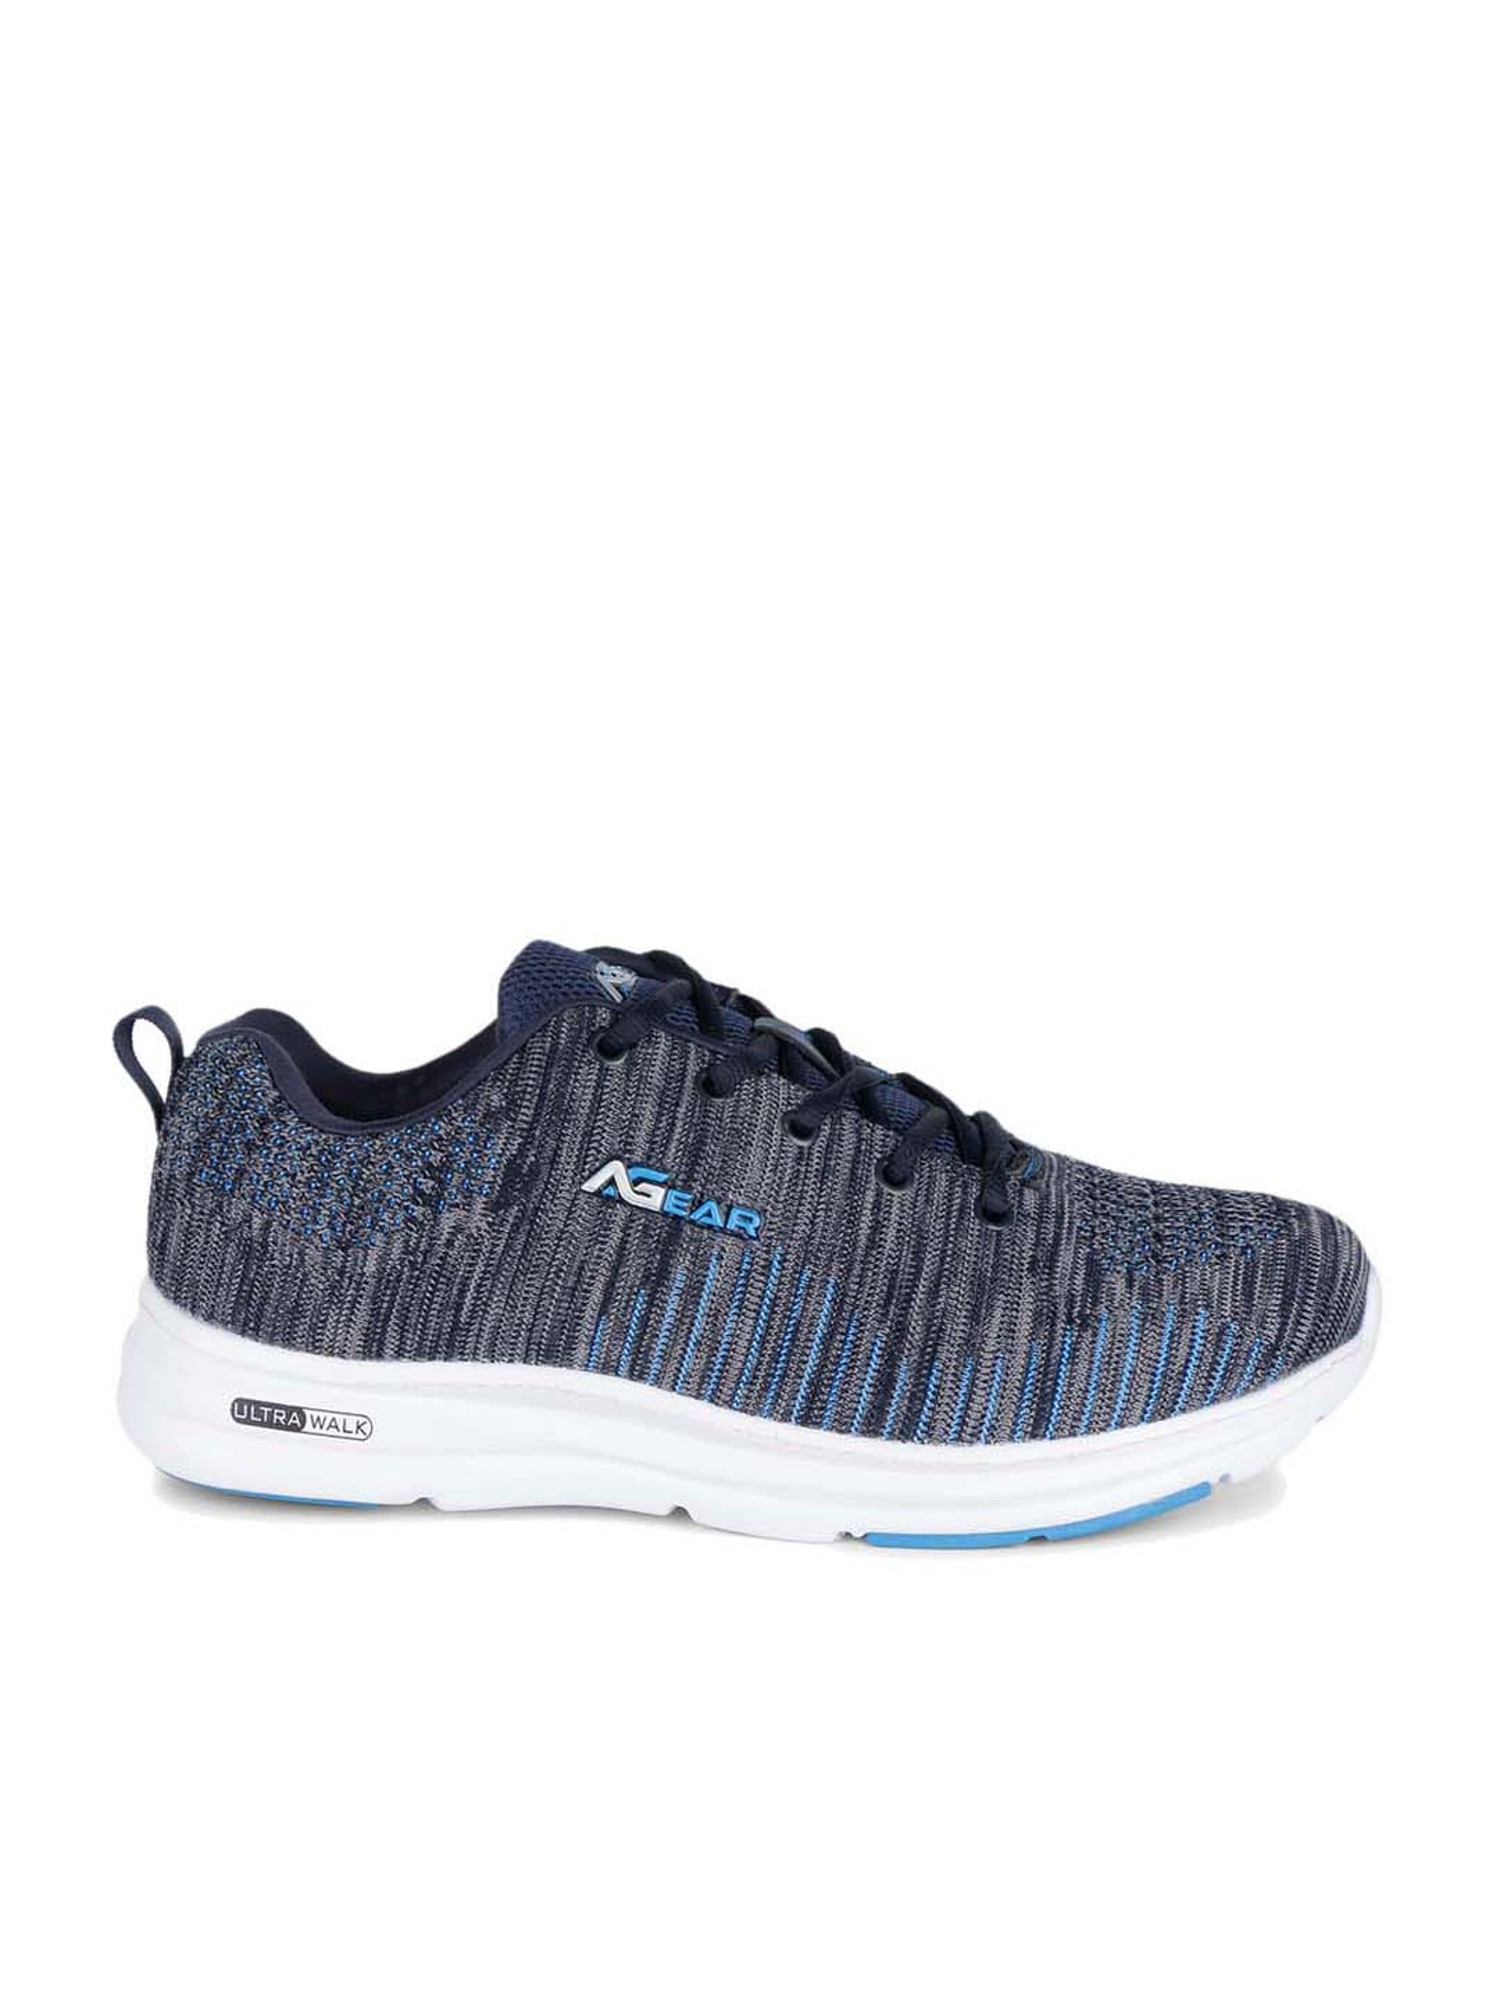 CAMPUS by Action AGEAR-2 Running shoes by Campus For Men - Buy CAMPUS by  Action AGEAR-2 Running shoes by Campus For Men Online at Best Price - Shop  Online for Footwears in India | Flipkart.com